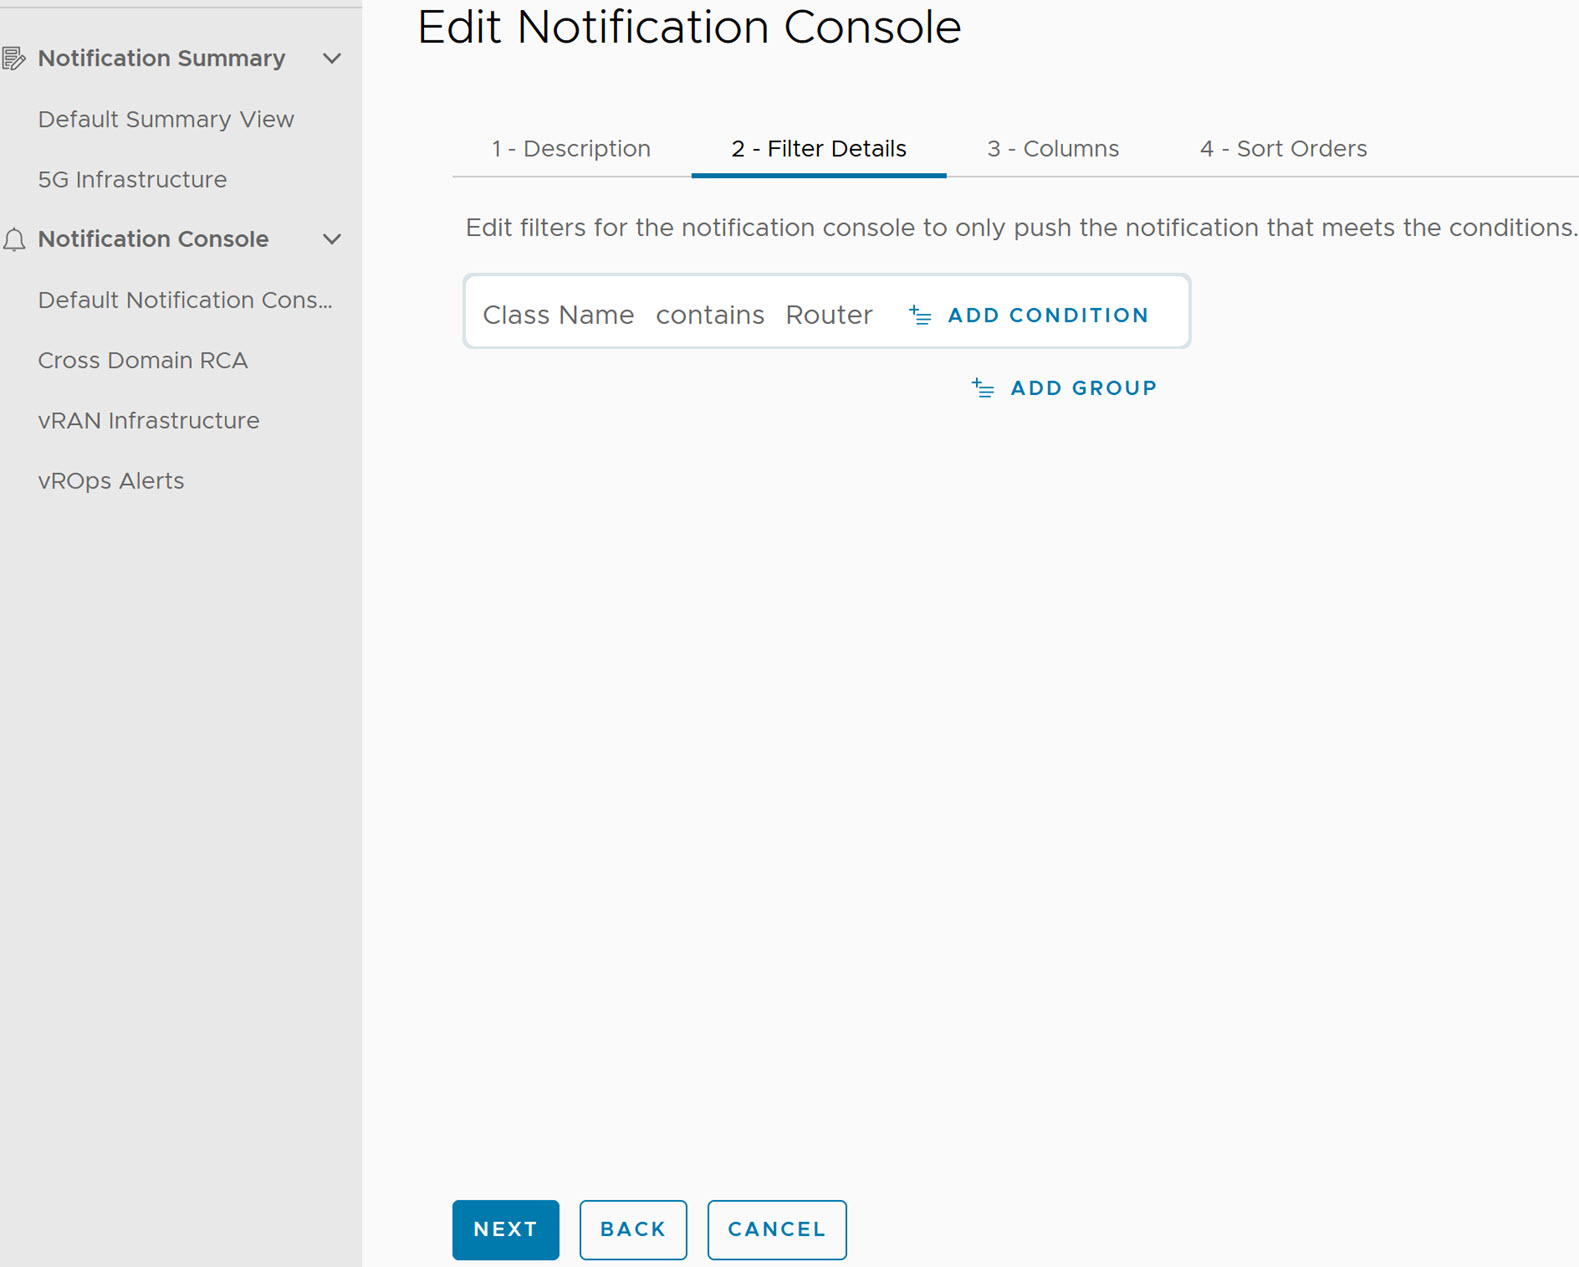 Edit Notification Console Filters